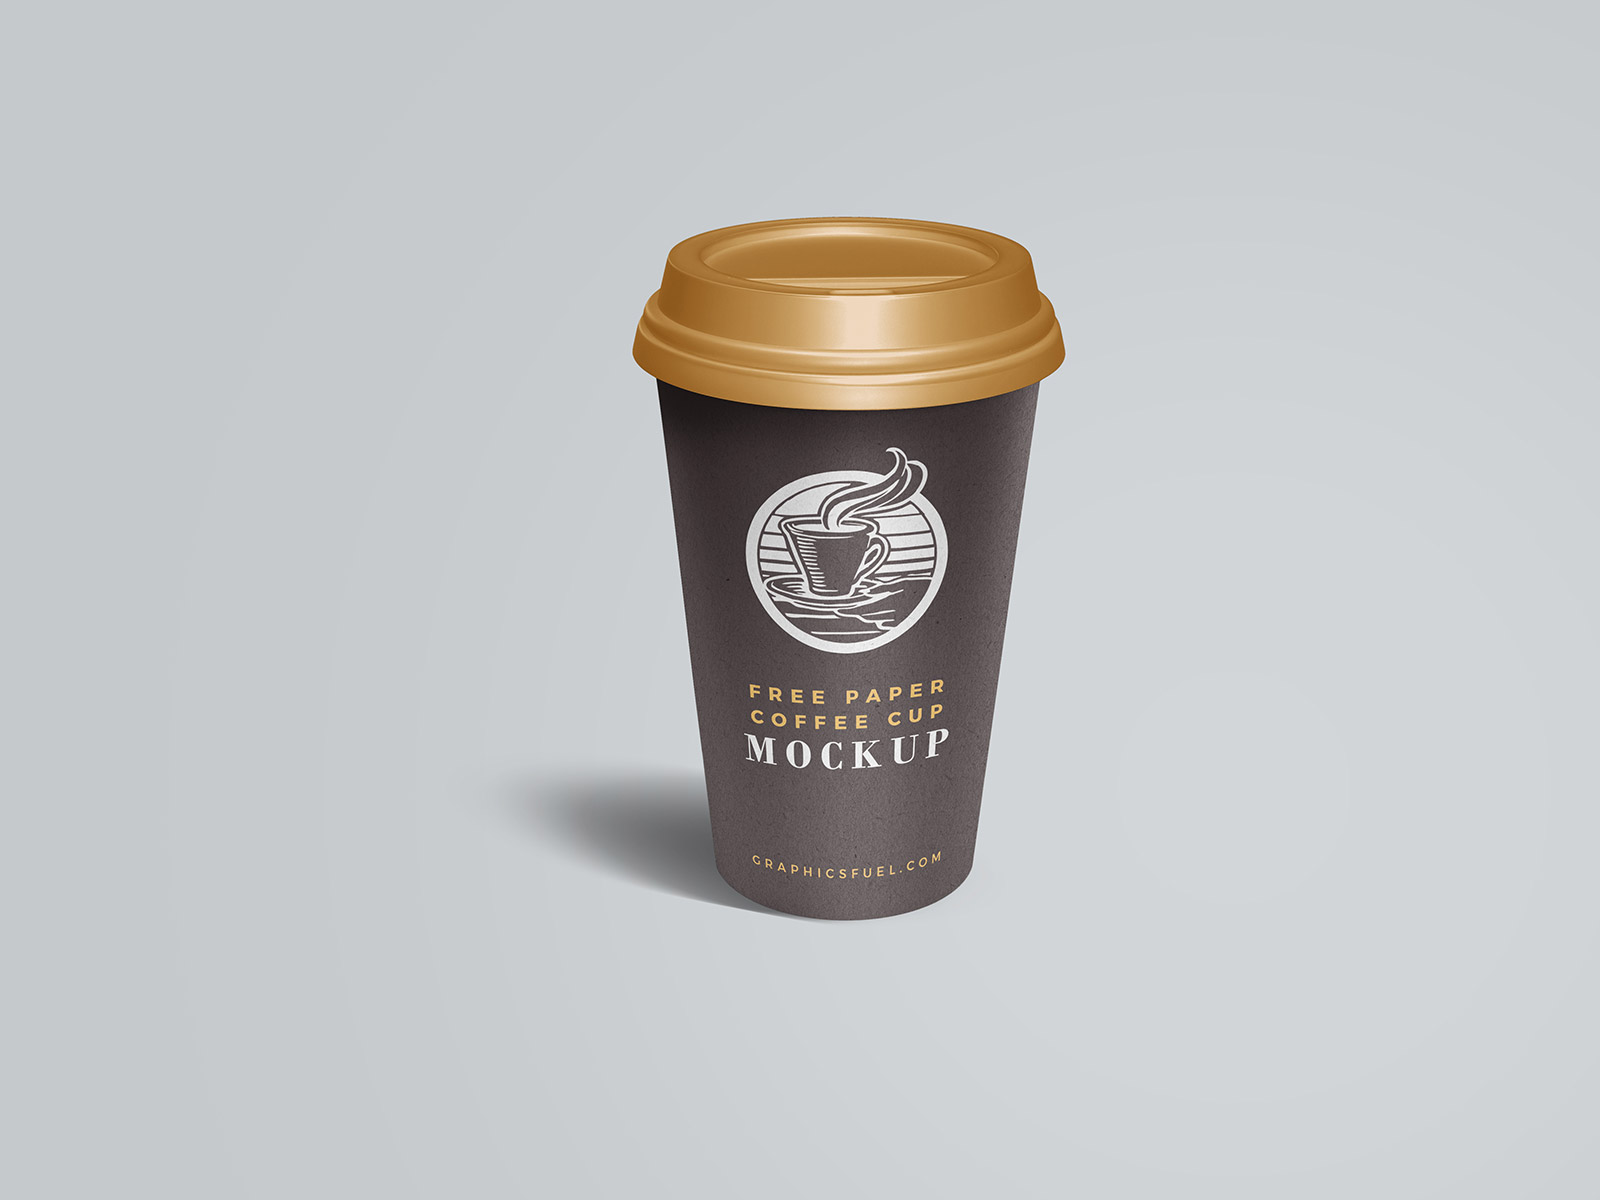 https://www.graphicsfuel.com/wp-content/uploads/2021/05/Free-Coffee-Cup-Mockup.jpg